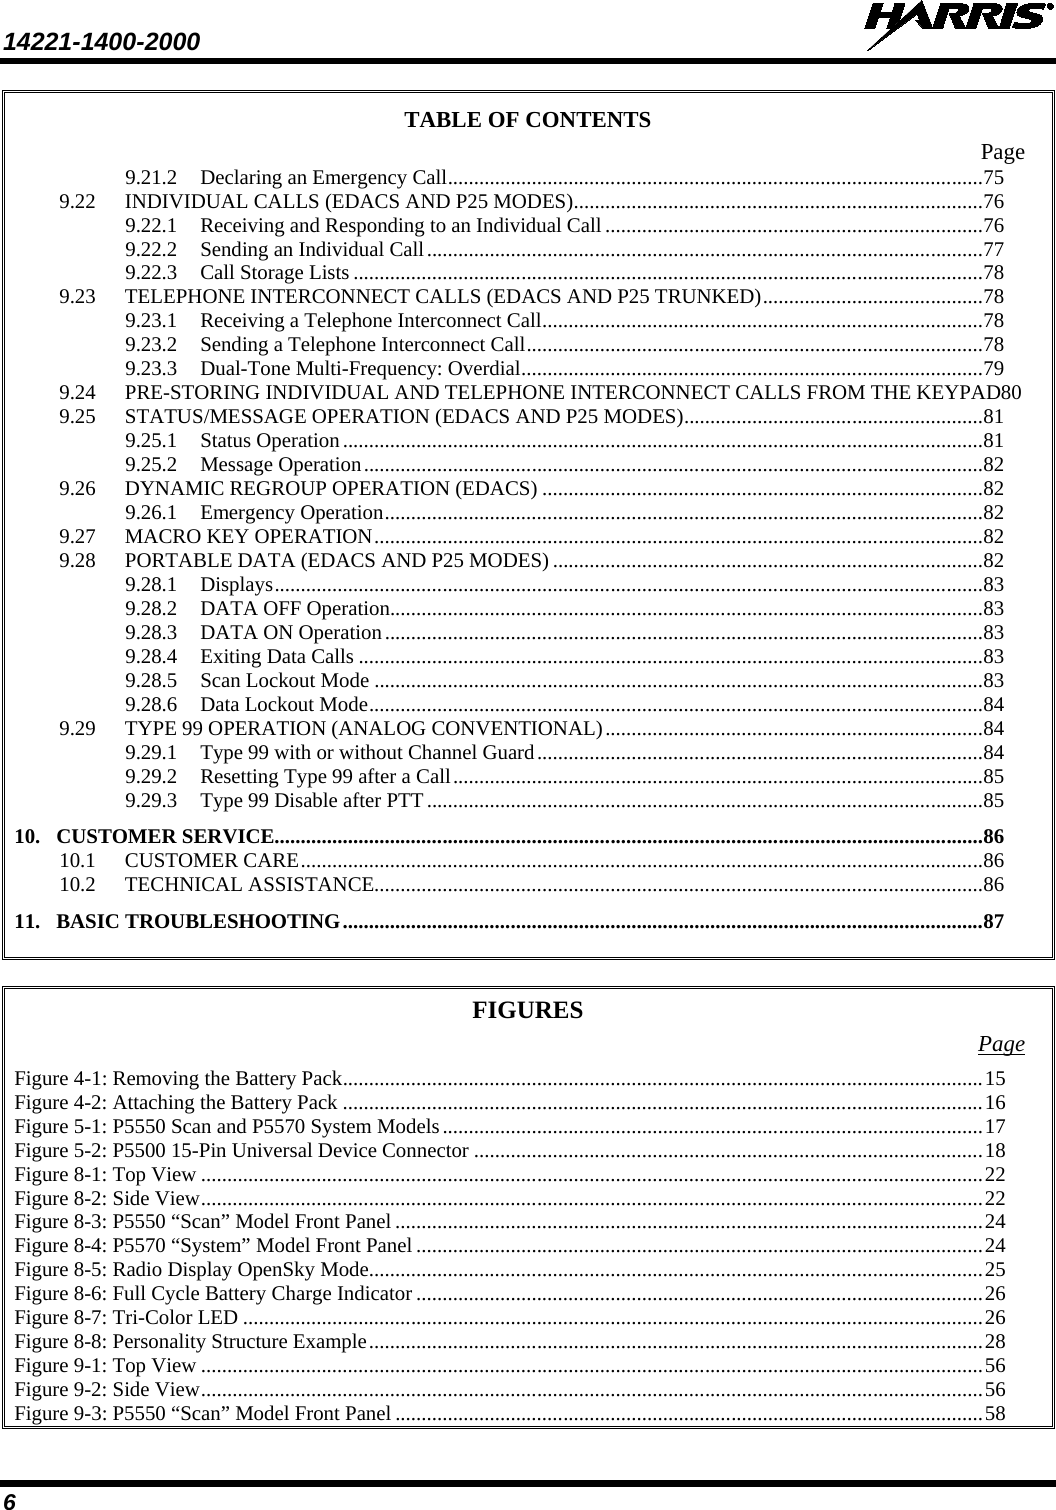 14221-1400-2000    6 TABLE OF CONTENTS Page 9.21.2 Declaring an Emergency Call ...................................................................................................... 75 9.22 INDIVIDUAL CALLS (EDACS AND P25 MODES) .............................................................................. 76 9.22.1 Receiving and Responding to an Individual Call ........................................................................ 76 9.22.2 Sending an Individual Call .......................................................................................................... 77 9.22.3 Call Storage Lists ........................................................................................................................ 78 9.23 TELEPHONE INTERCONNECT CALLS (EDACS AND P25 TRUNKED) .......................................... 78 9.23.1 Receiving a Telephone Interconnect Call .................................................................................... 78 9.23.2 Sending a Telephone Interconnect Call ....................................................................................... 78 9.23.3 Dual-Tone Multi-Frequency: Overdial ........................................................................................ 79 9.24 PRE-STORING INDIVIDUAL AND TELEPHONE INTERCONNECT CALLS FROM THE KEYPAD80 9.25 STATUS/MESSAGE OPERATION (EDACS AND P25 MODES) ......................................................... 81 9.25.1 Status Operation .......................................................................................................................... 81 9.25.2 Message Operation ...................................................................................................................... 82 9.26 DYNAMIC REGROUP OPERATION (EDACS) .................................................................................... 82 9.26.1 Emergency Operation .................................................................................................................. 82 9.27 MACRO KEY OPERATION .................................................................................................................... 82 9.28 PORTABLE DATA (EDACS AND P25 MODES) .................................................................................. 82 9.28.1 Displays ....................................................................................................................................... 83 9.28.2 DATA OFF Operation................................................................................................................. 83 9.28.3 DATA ON Operation .................................................................................................................. 83 9.28.4 Exiting Data Calls ....................................................................................................................... 83 9.28.5 Scan Lockout Mode .................................................................................................................... 83 9.28.6 Data Lockout Mode ..................................................................................................................... 84 9.29 TYPE 99 OPERATION (ANALOG CONVENTIONAL) ........................................................................ 84 9.29.1 Type 99 with or without Channel Guard ..................................................................................... 84 9.29.2 Resetting Type 99 after a Call ..................................................................................................... 85 9.29.3 Type 99 Disable after PTT .......................................................................................................... 85 10. CUSTOMER SERVICE....................................................................................................................................... 86 10.1 CUSTOMER CARE .................................................................................................................................. 86 10.2 TECHNICAL ASSISTANCE.................................................................................................................... 86 11. BASIC TROUBLESHOOTING .......................................................................................................................... 87   FIGURES Page Figure 4-1: Removing the Battery Pack .......................................................................................................................... 15 Figure 4-2: Attaching the Battery Pack .......................................................................................................................... 16 Figure 5-1: P5550 Scan and P5570 System Models ....................................................................................................... 17 Figure 5-2: P5500 15-Pin Universal Device Connector ................................................................................................. 18 Figure 8-1: Top View ..................................................................................................................................................... 22 Figure 8-2: Side View ..................................................................................................................................................... 22 Figure 8-3: P5550 “Scan” Model Front Panel ................................................................................................................ 24 Figure 8-4: P5570 “System” Model Front Panel ............................................................................................................ 24 Figure 8-5: Radio Display OpenSky Mode ..................................................................................................................... 25 Figure 8-6: Full Cycle Battery Charge Indicator ............................................................................................................ 26 Figure 8-7: Tri-Color LED ............................................................................................................................................. 26 Figure 8-8: Personality Structure Example ..................................................................................................................... 28 Figure 9-1: Top View ..................................................................................................................................................... 56 Figure 9-2: Side View ..................................................................................................................................................... 56 Figure 9-3: P5550 “Scan” Model Front Panel ................................................................................................................ 58 